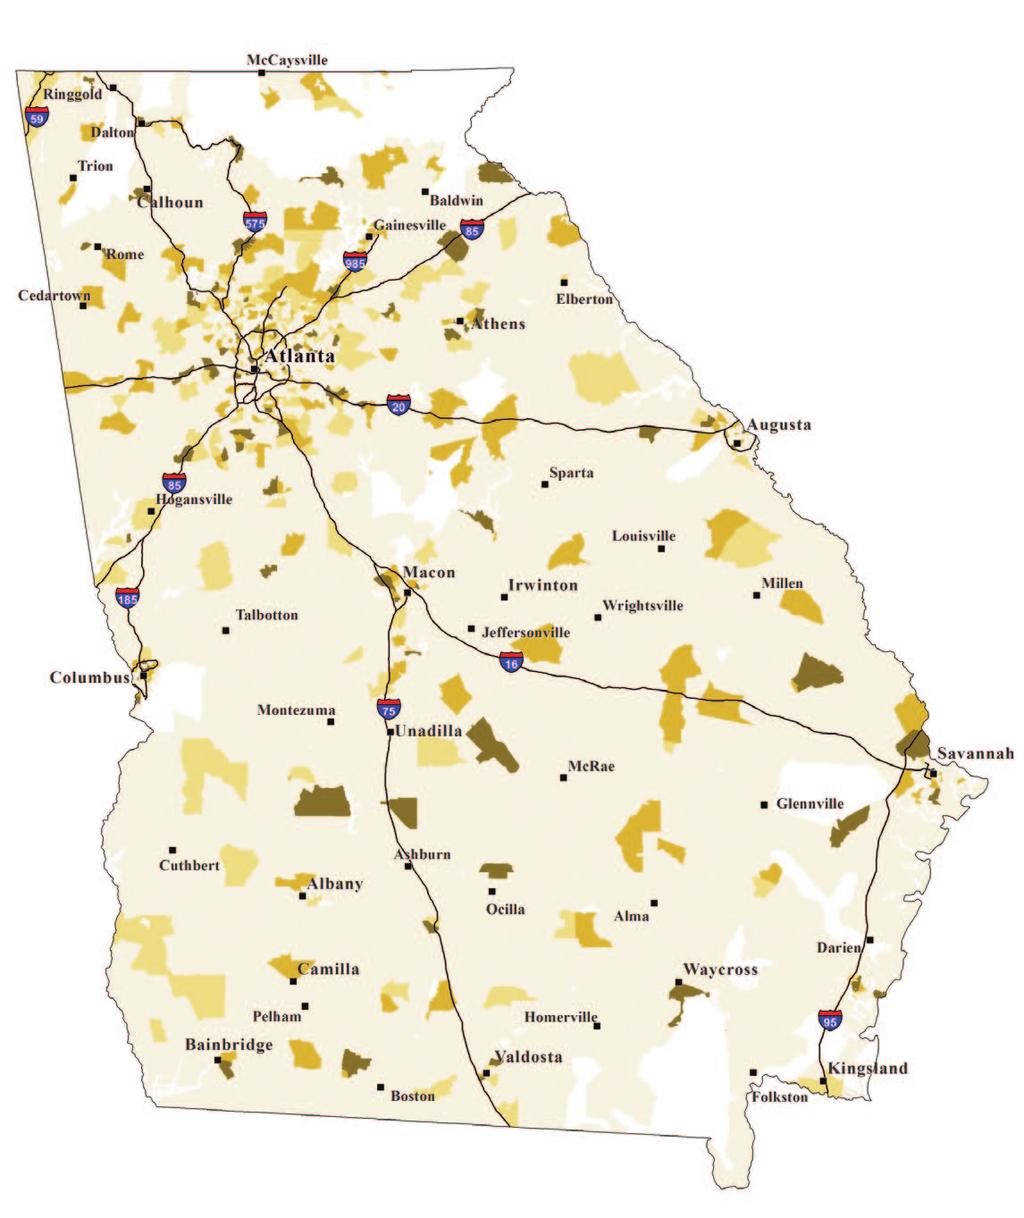 concentrated along major highways and in suburban areas, while urban centers, as well as rural communities throughout Georgia, are relatively underserved.